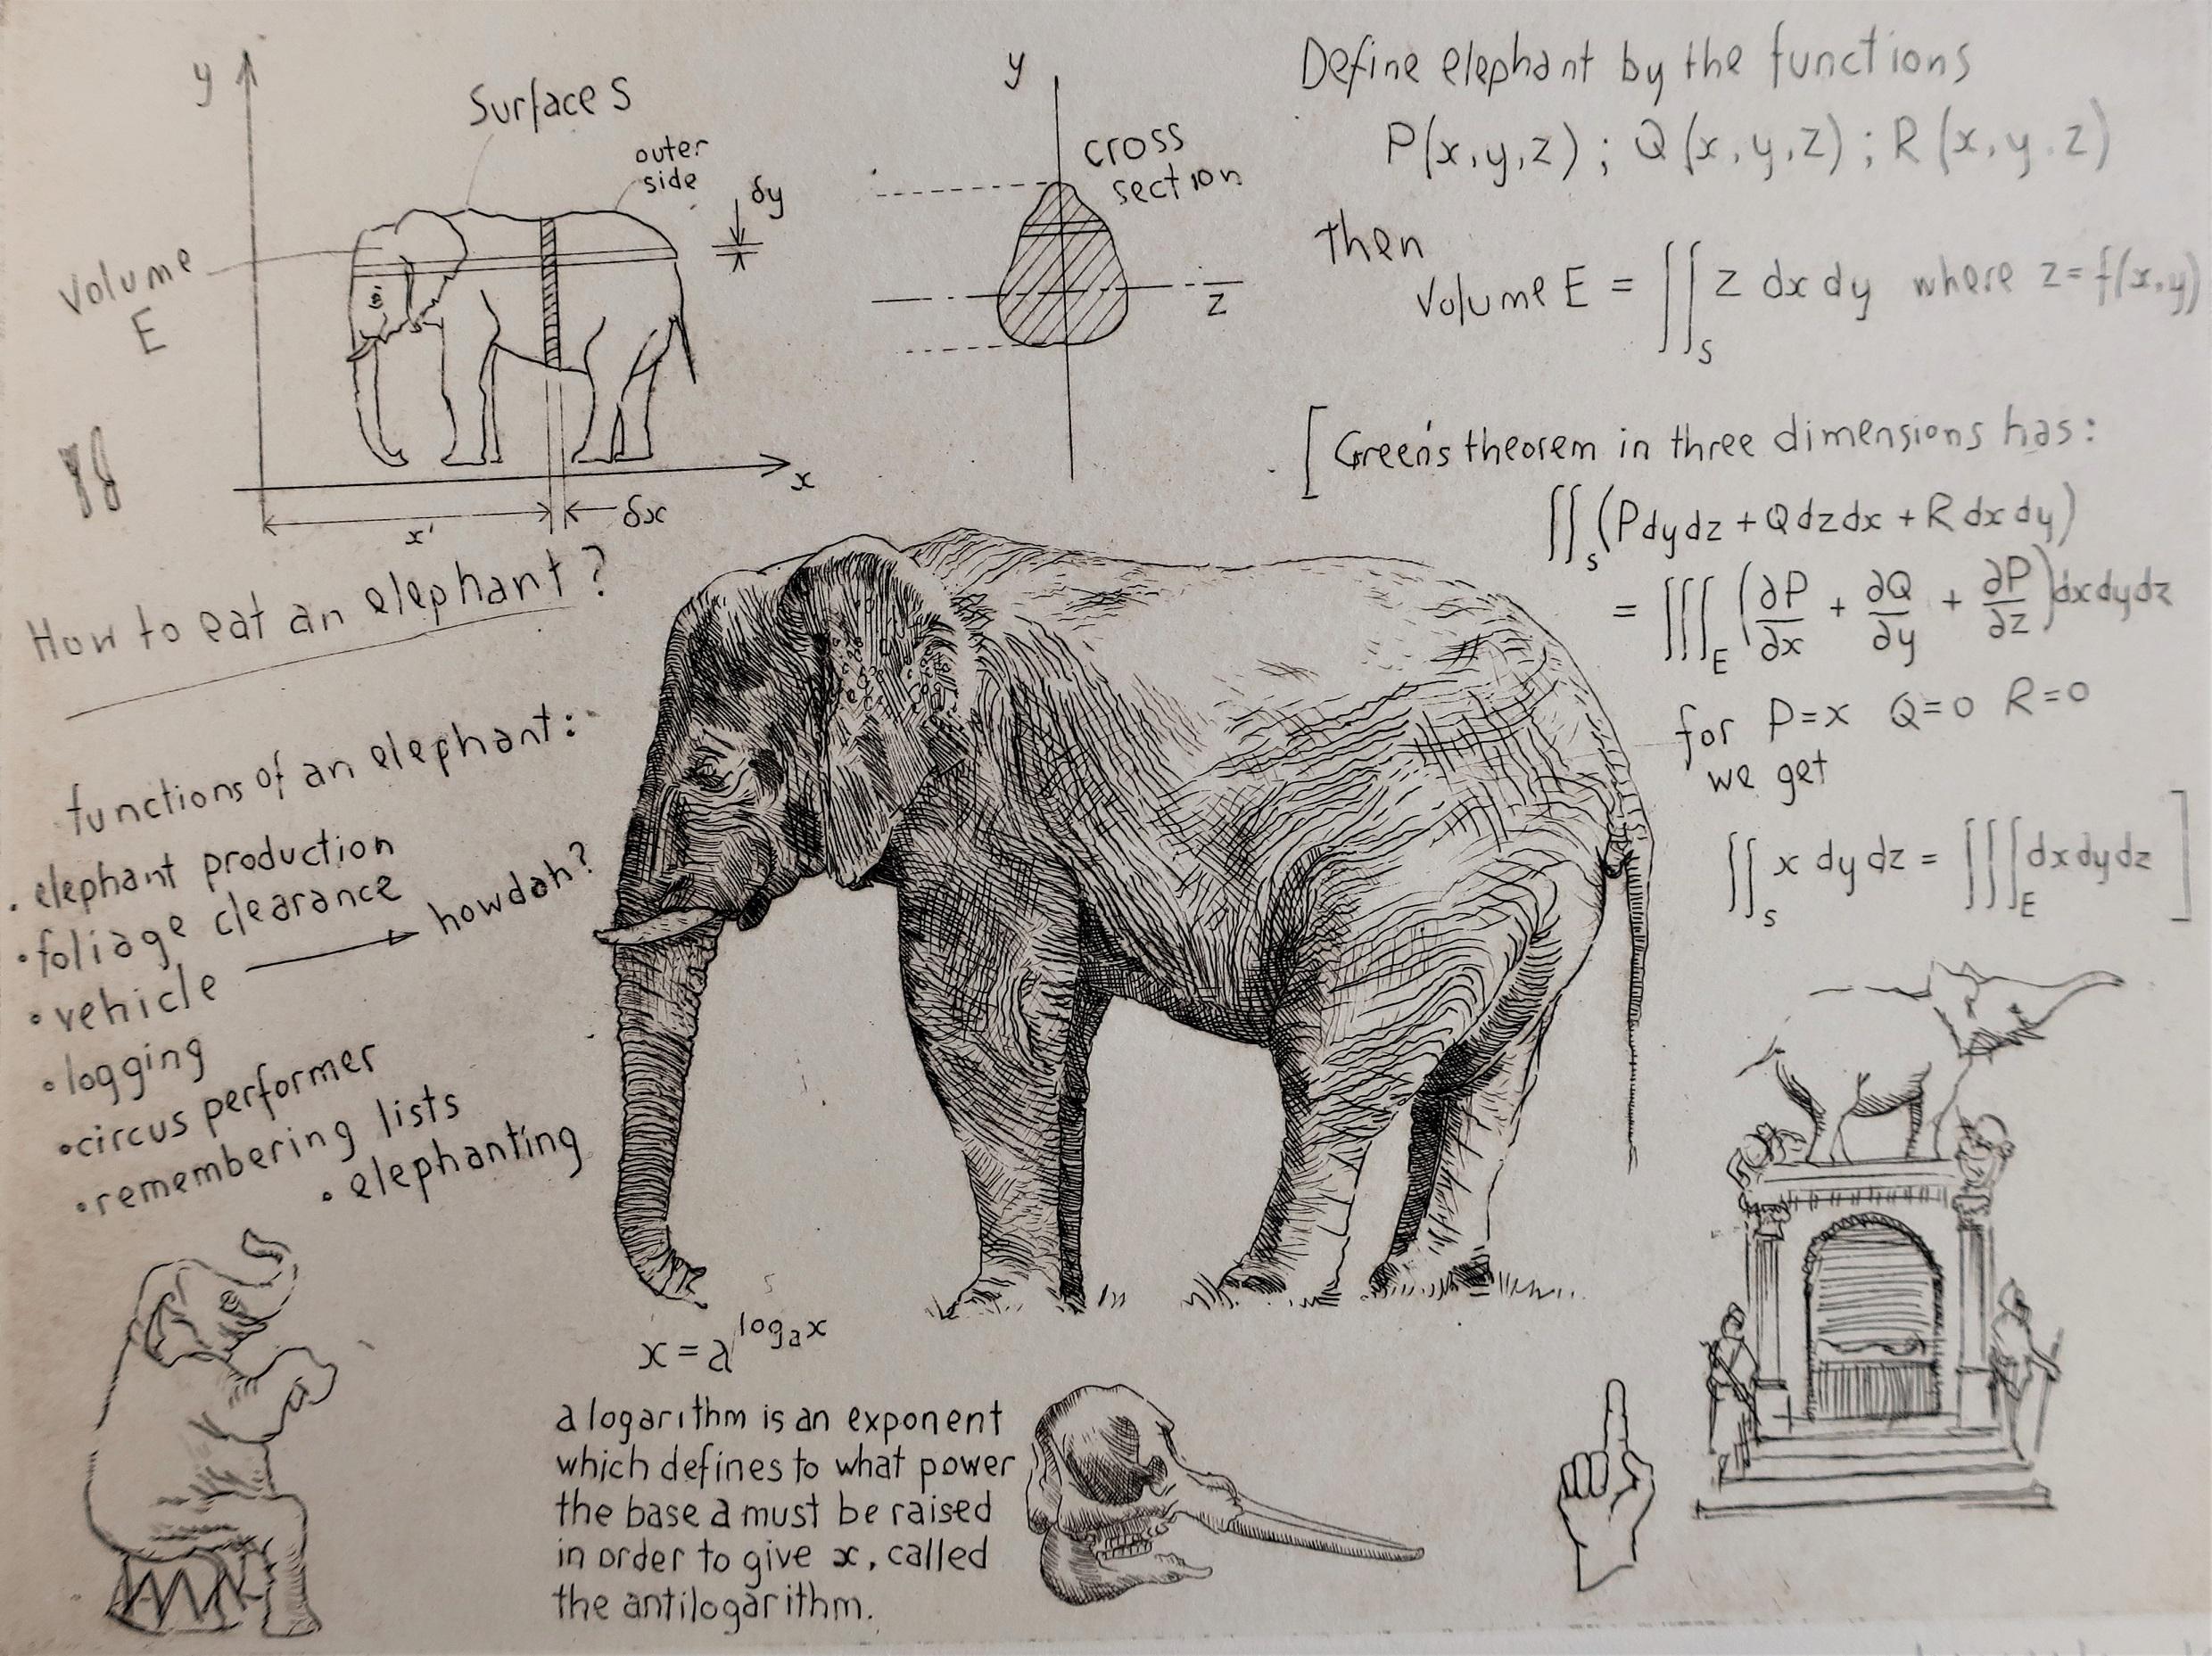 How To Eat An Elephant is an original etching by Will Taylor. It explores animal images and mathematics, including the integral of volumes. Each impression is marked on the reverse with the artist’s Woolstore Studio stamp.

Additional